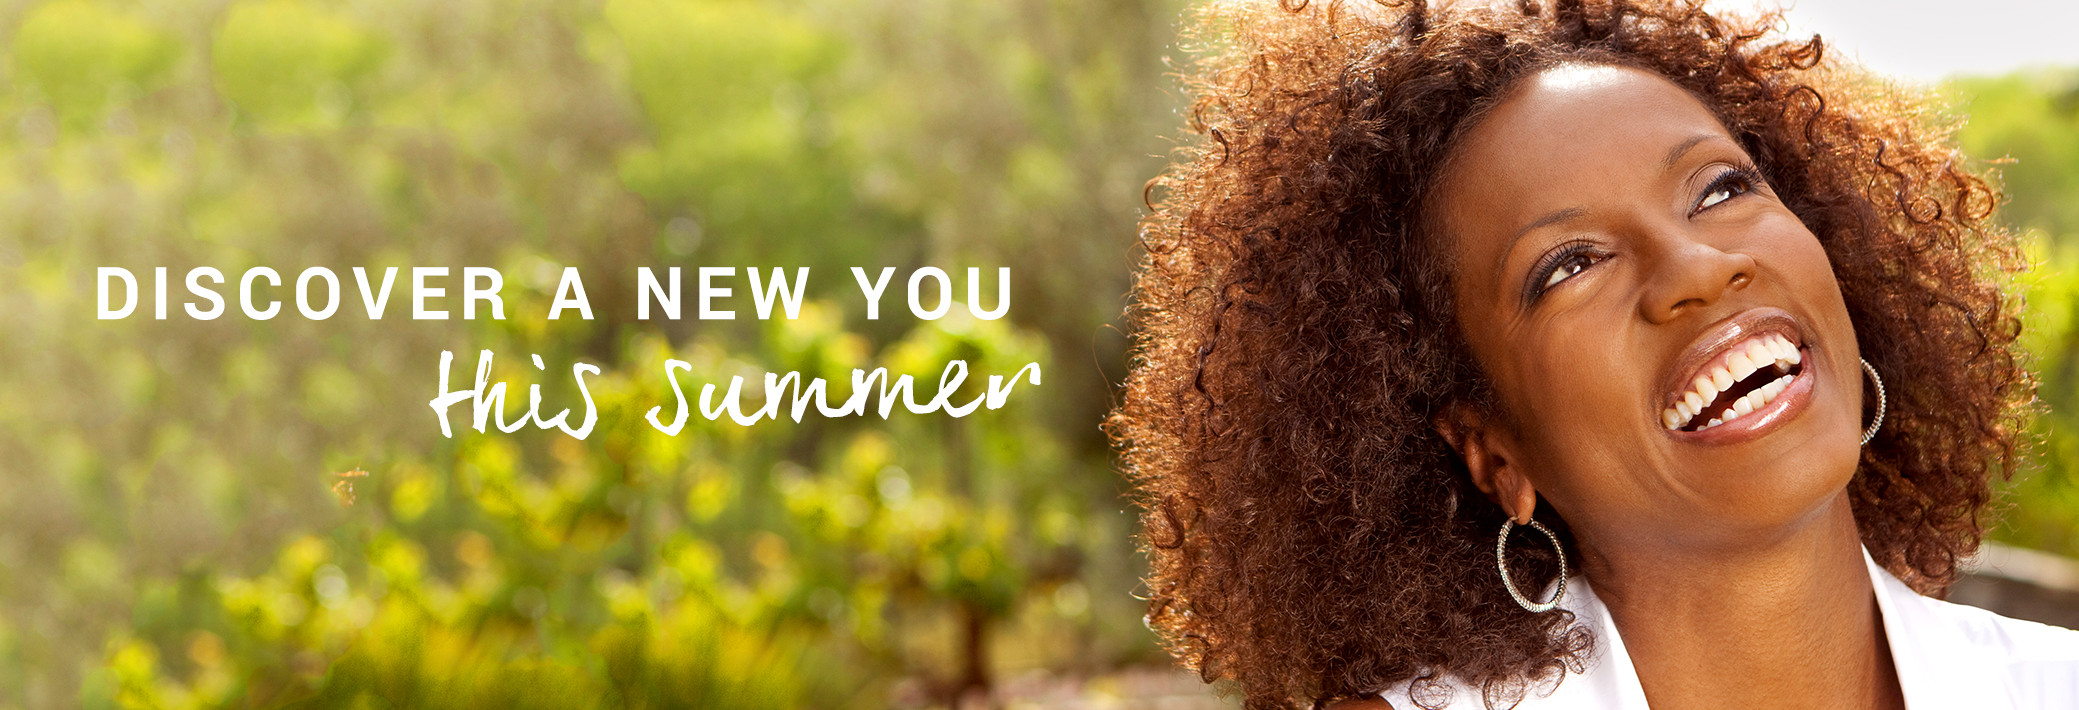 Discover a new you this summer